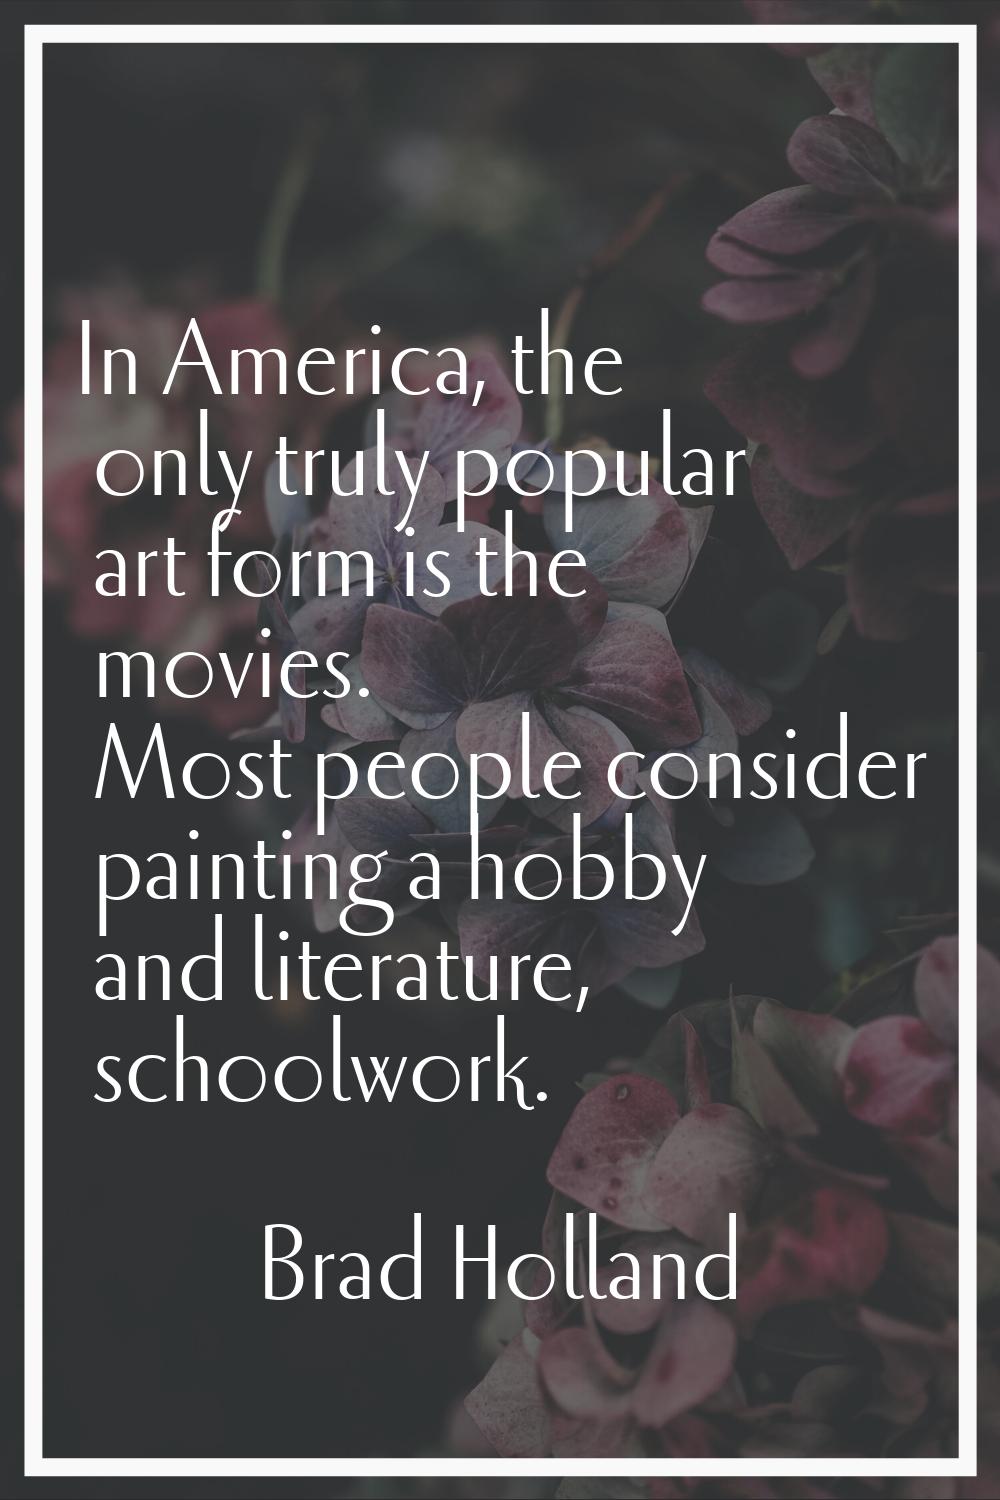 In America, the only truly popular art form is the movies. Most people consider painting a hobby an